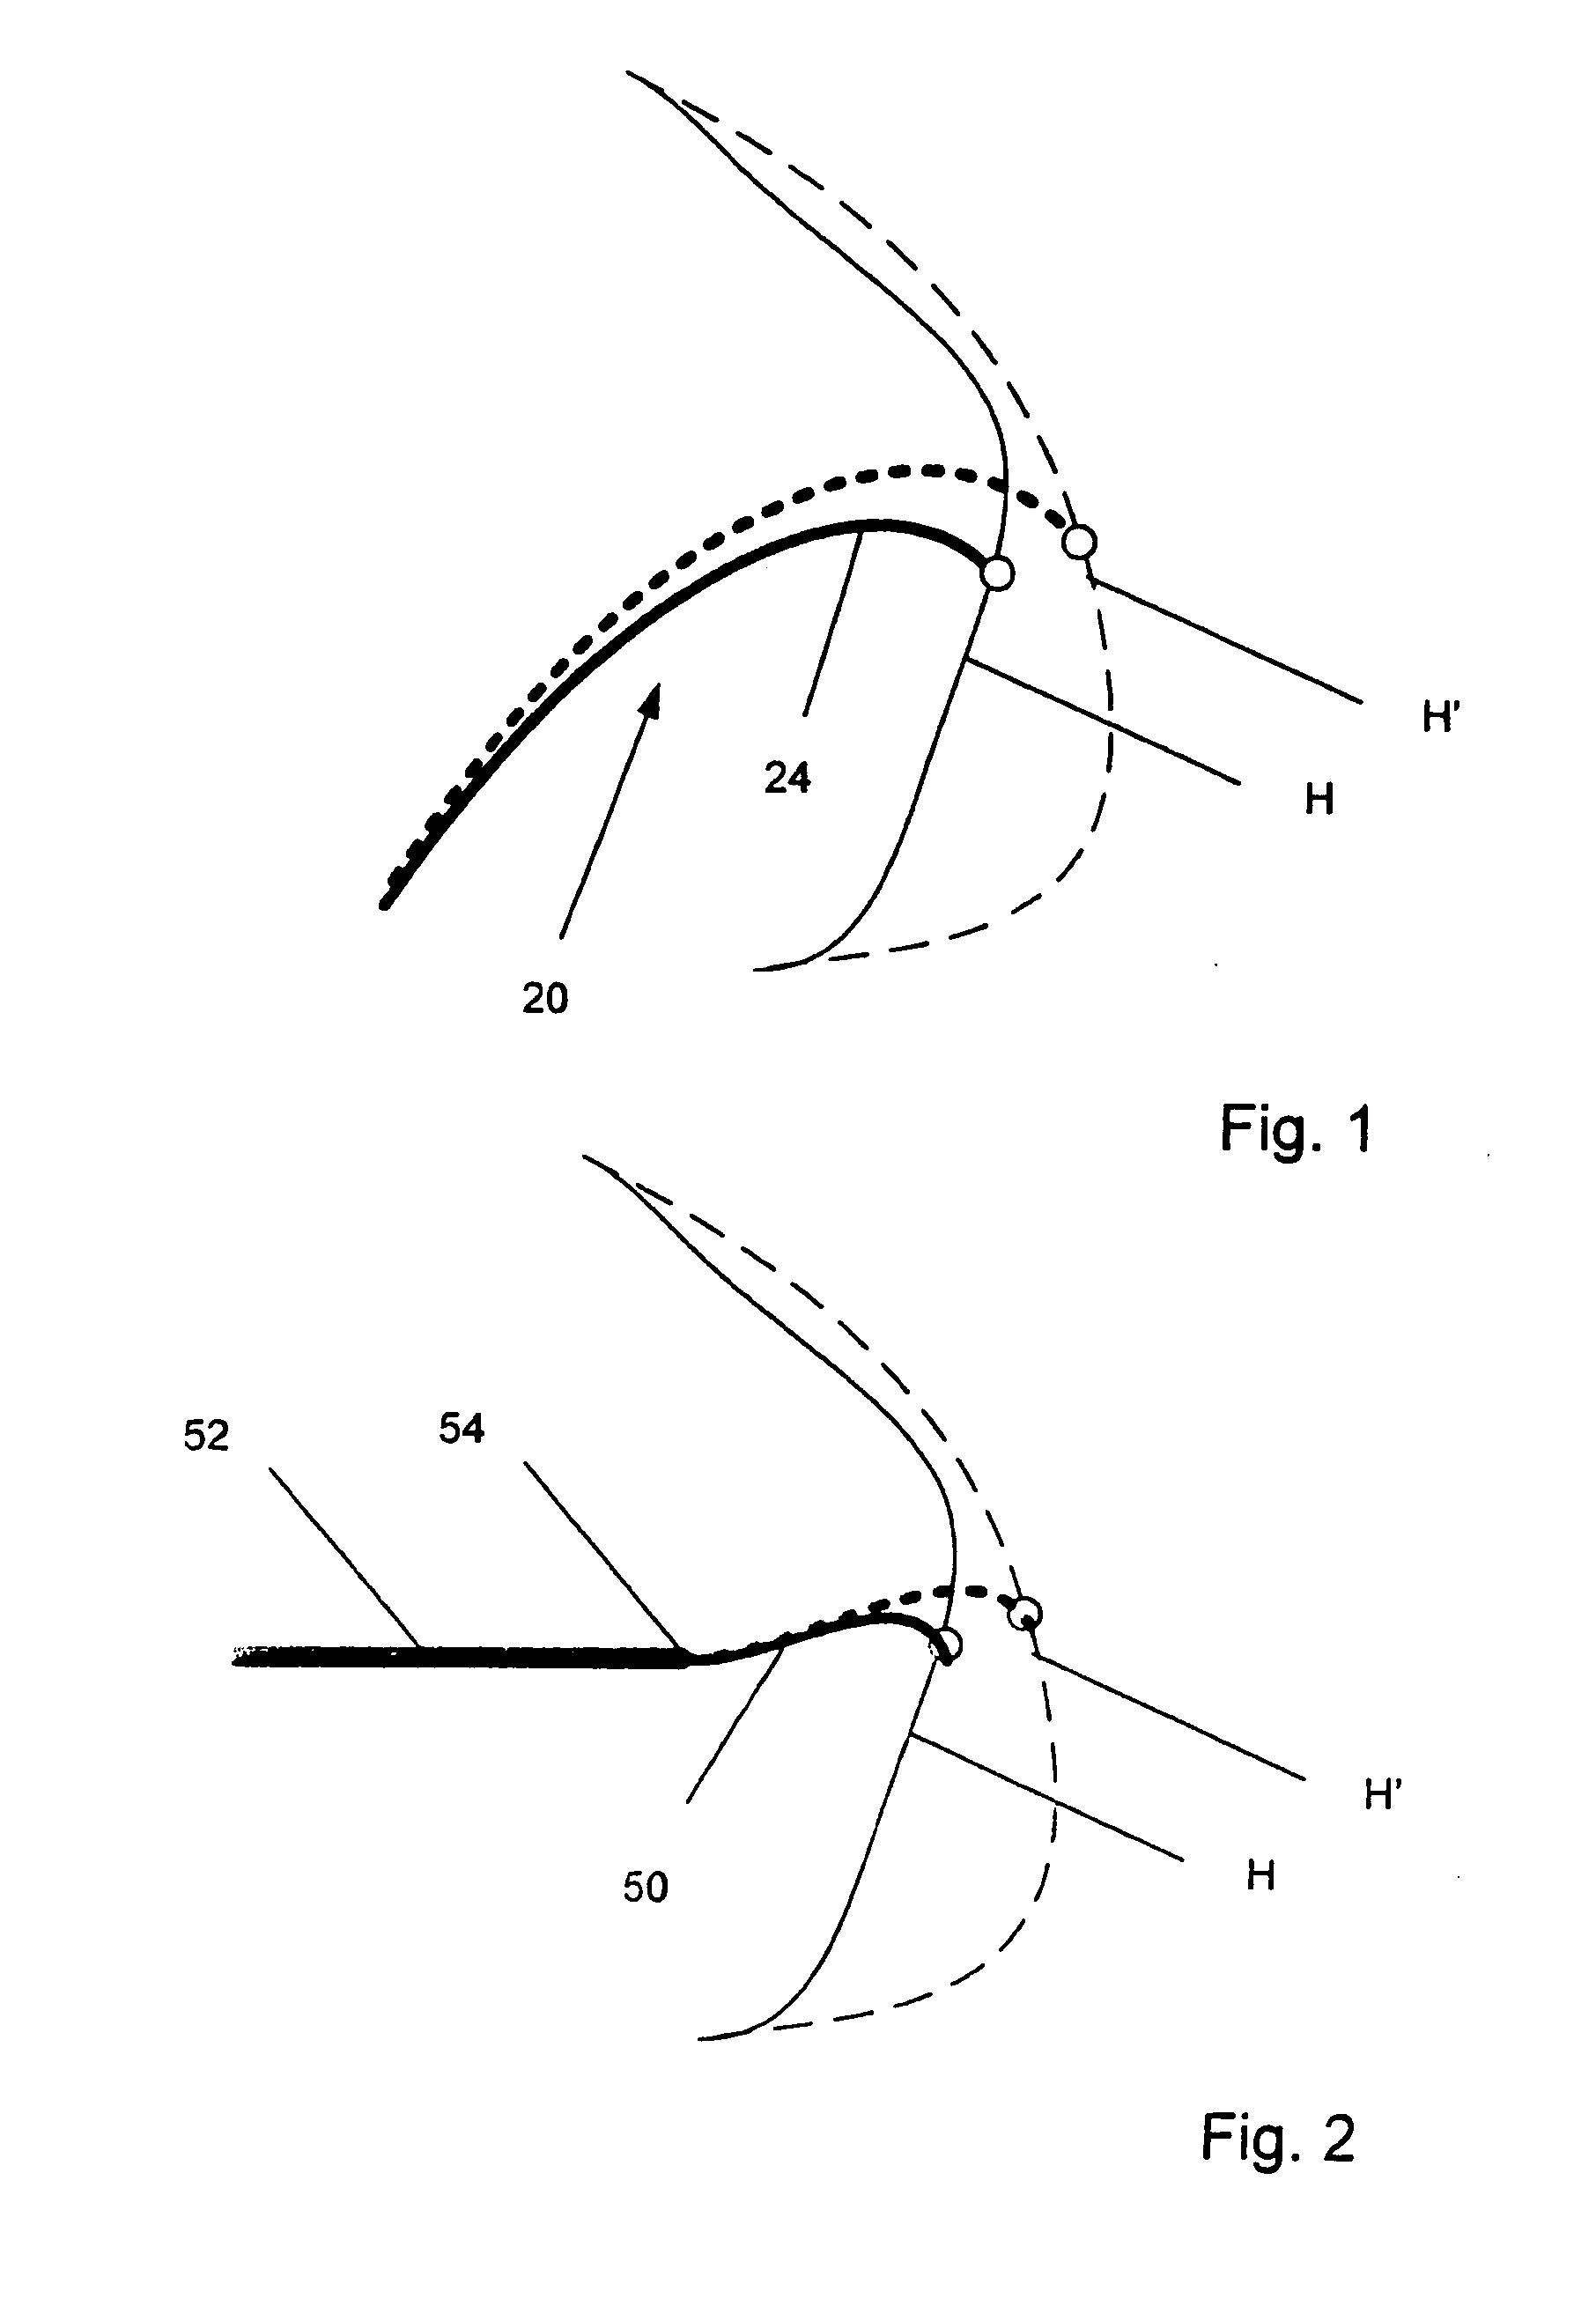 Electrophysiology catheter and system for gentle and firm wall contact